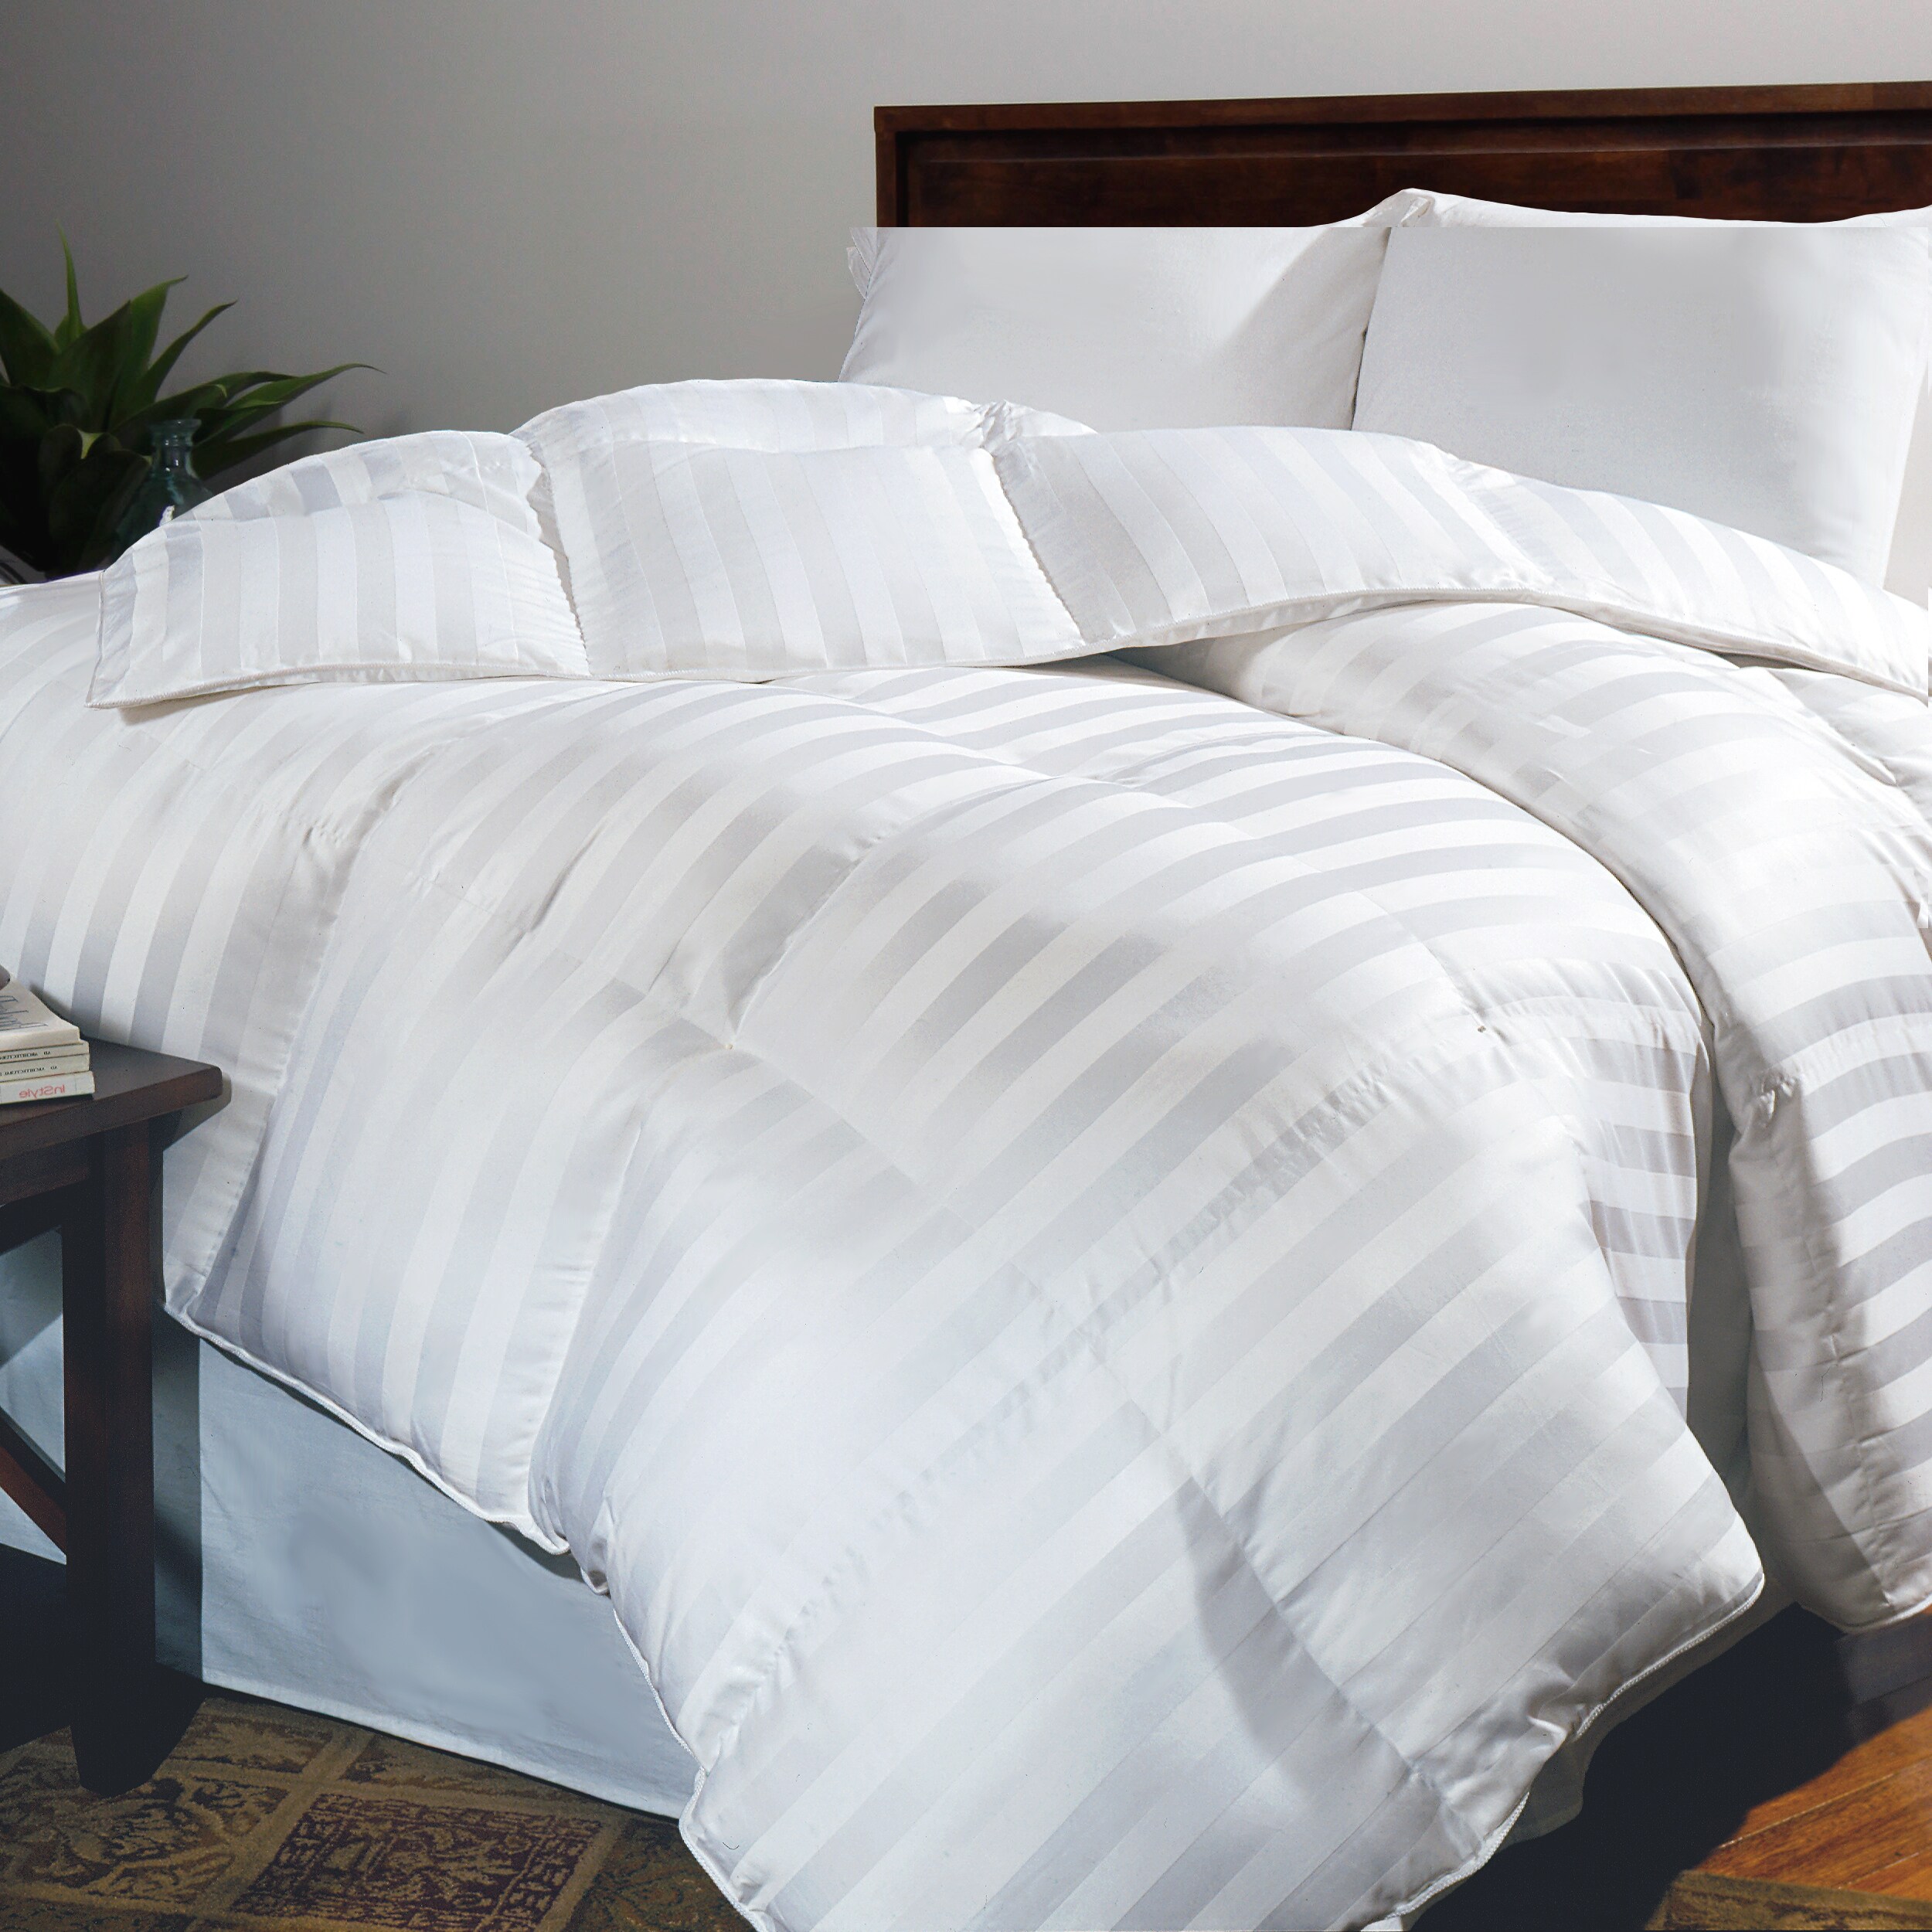 extra warmth siberian white down comforter starting at $ 124 99 select